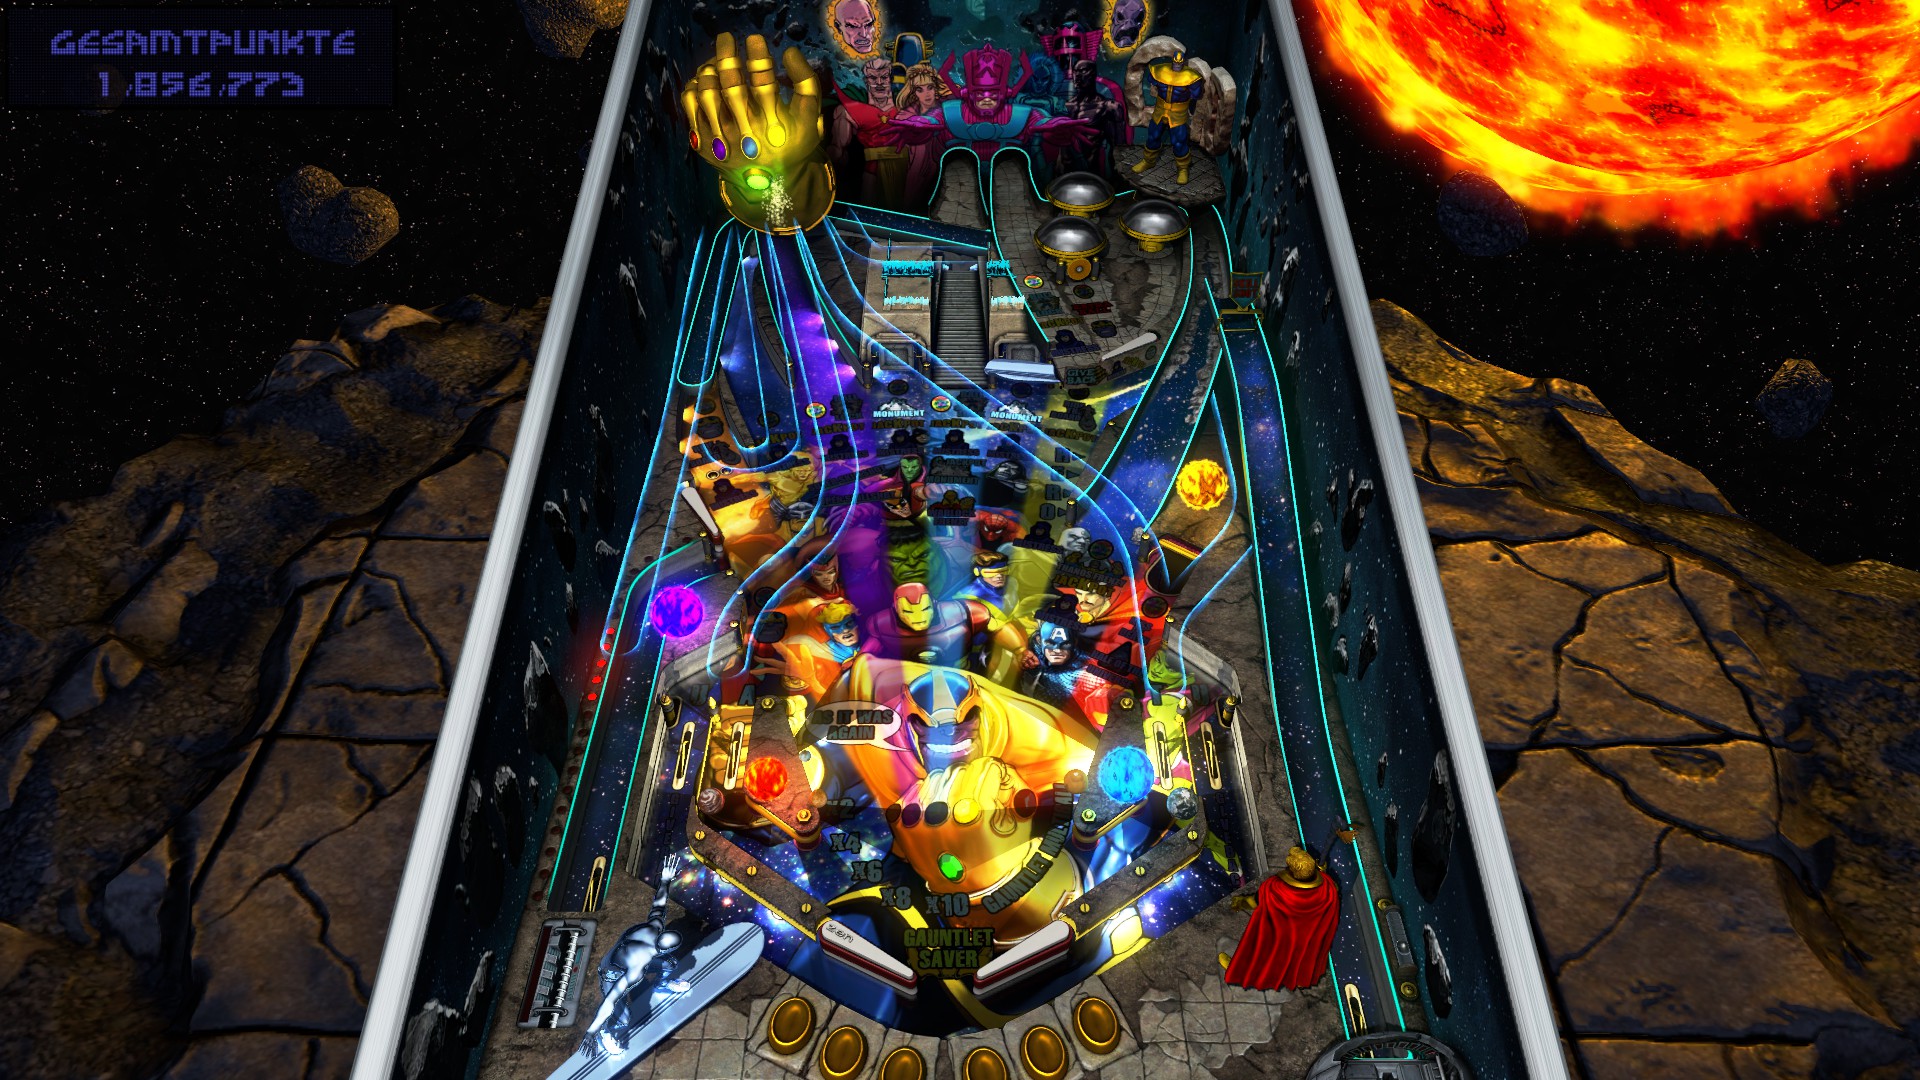 e2e4: Pinball FX3: The Infinity Gauntlet [Classic] (PC) 1,856,773 points on 2022-06-06 22:24:57